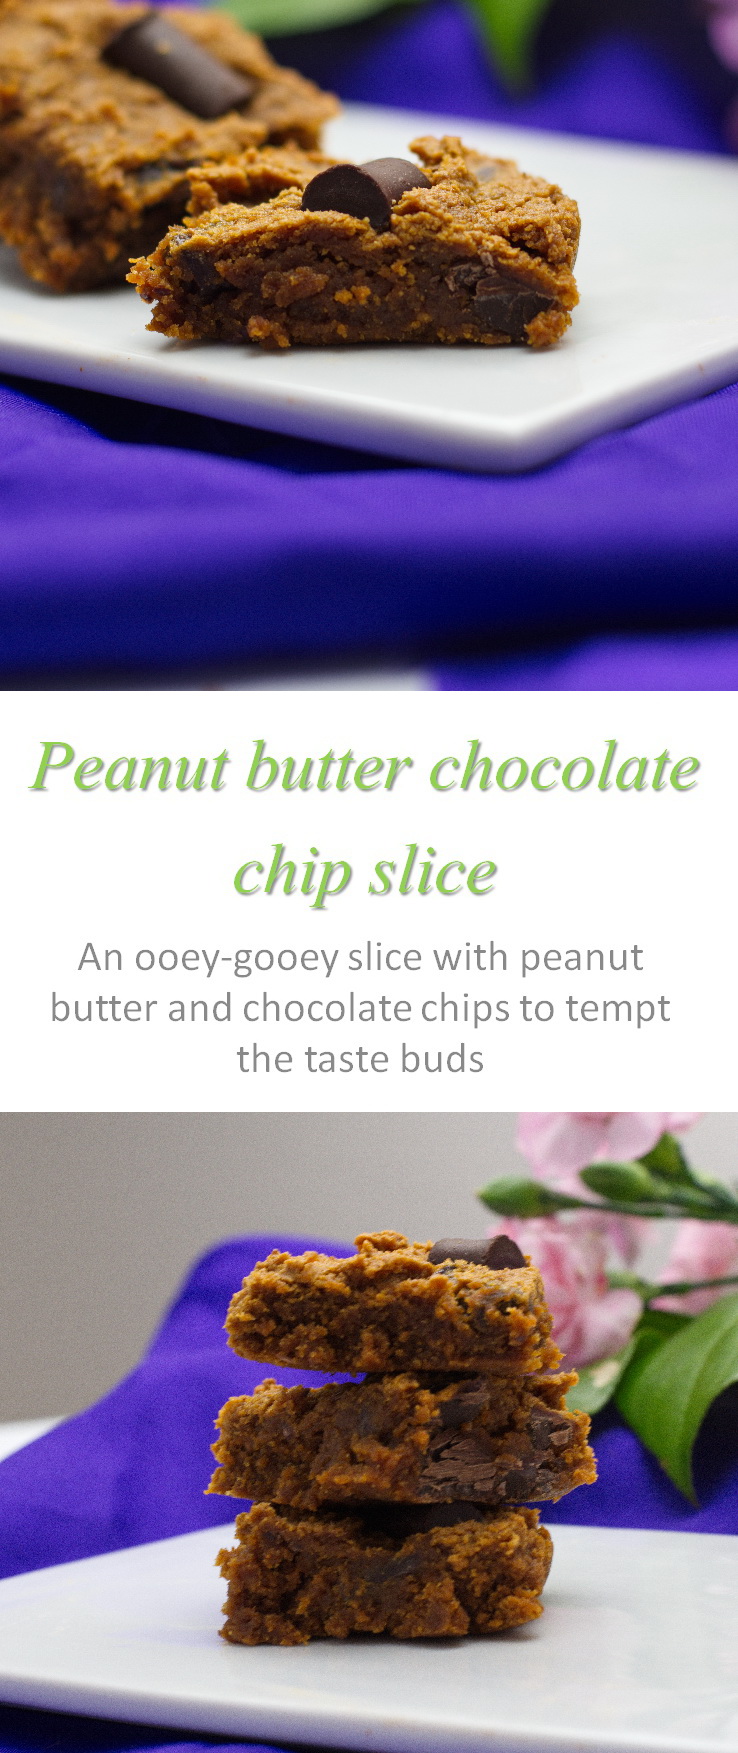 This chocolate chip peanut butter slice is a healthy combination of chocolate and peanut butter - gluten, dairy, egg and refined sugar-free. #peanutbutter